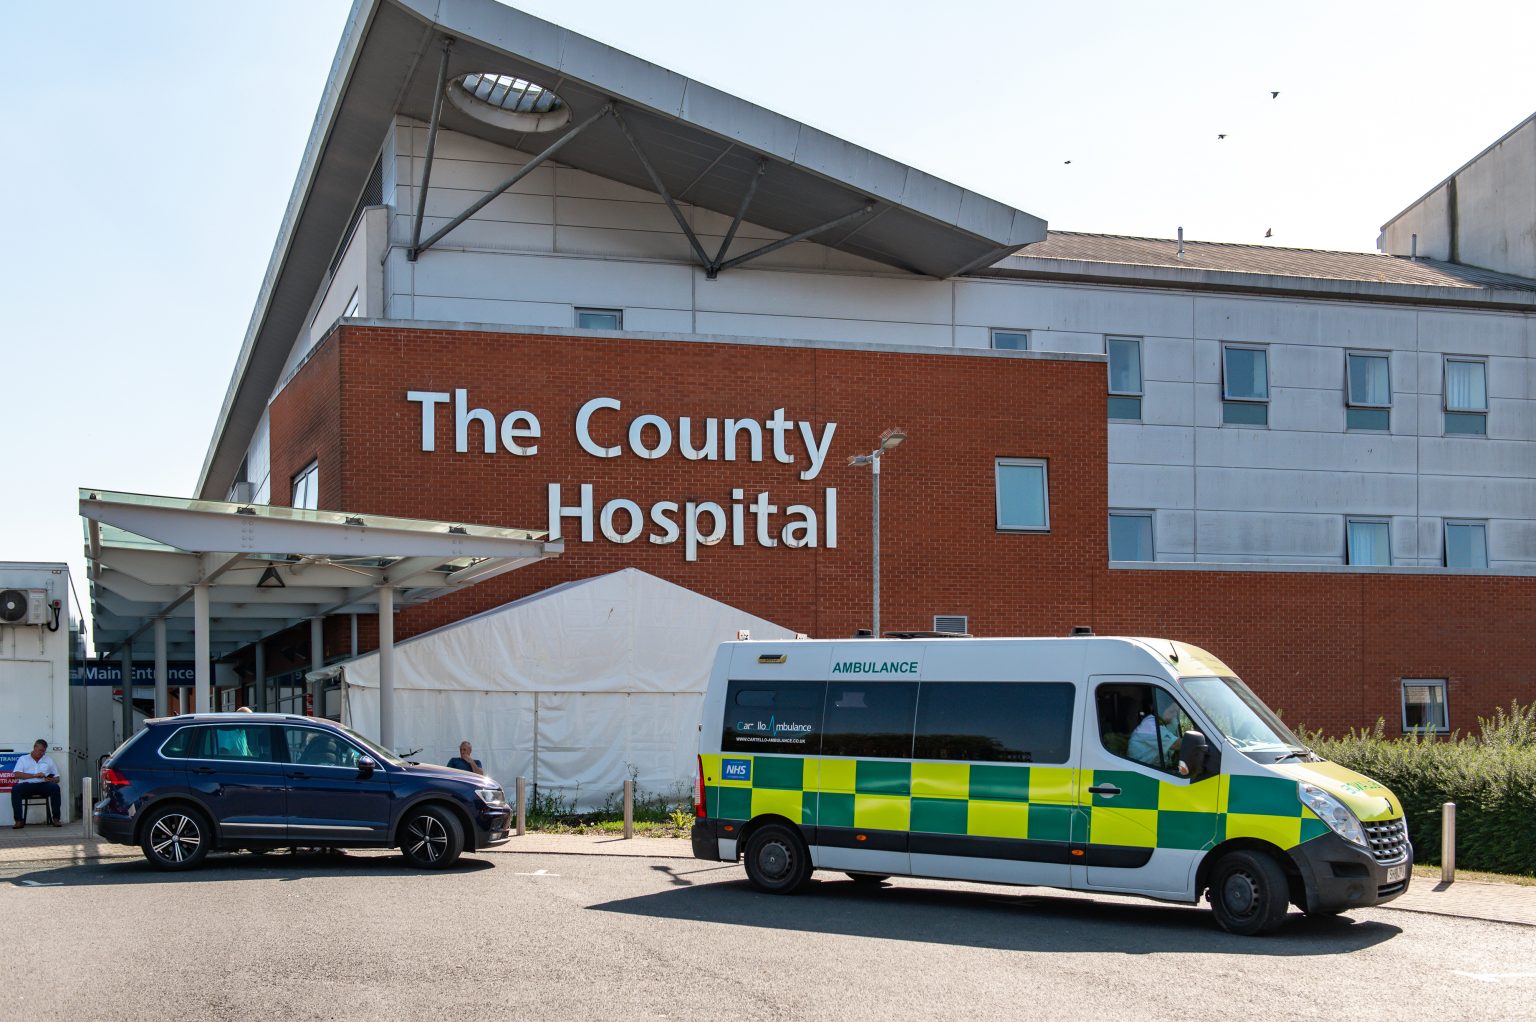 NEWS | The number of patients with COVID-19 at hospital in Herefordshire has fallen